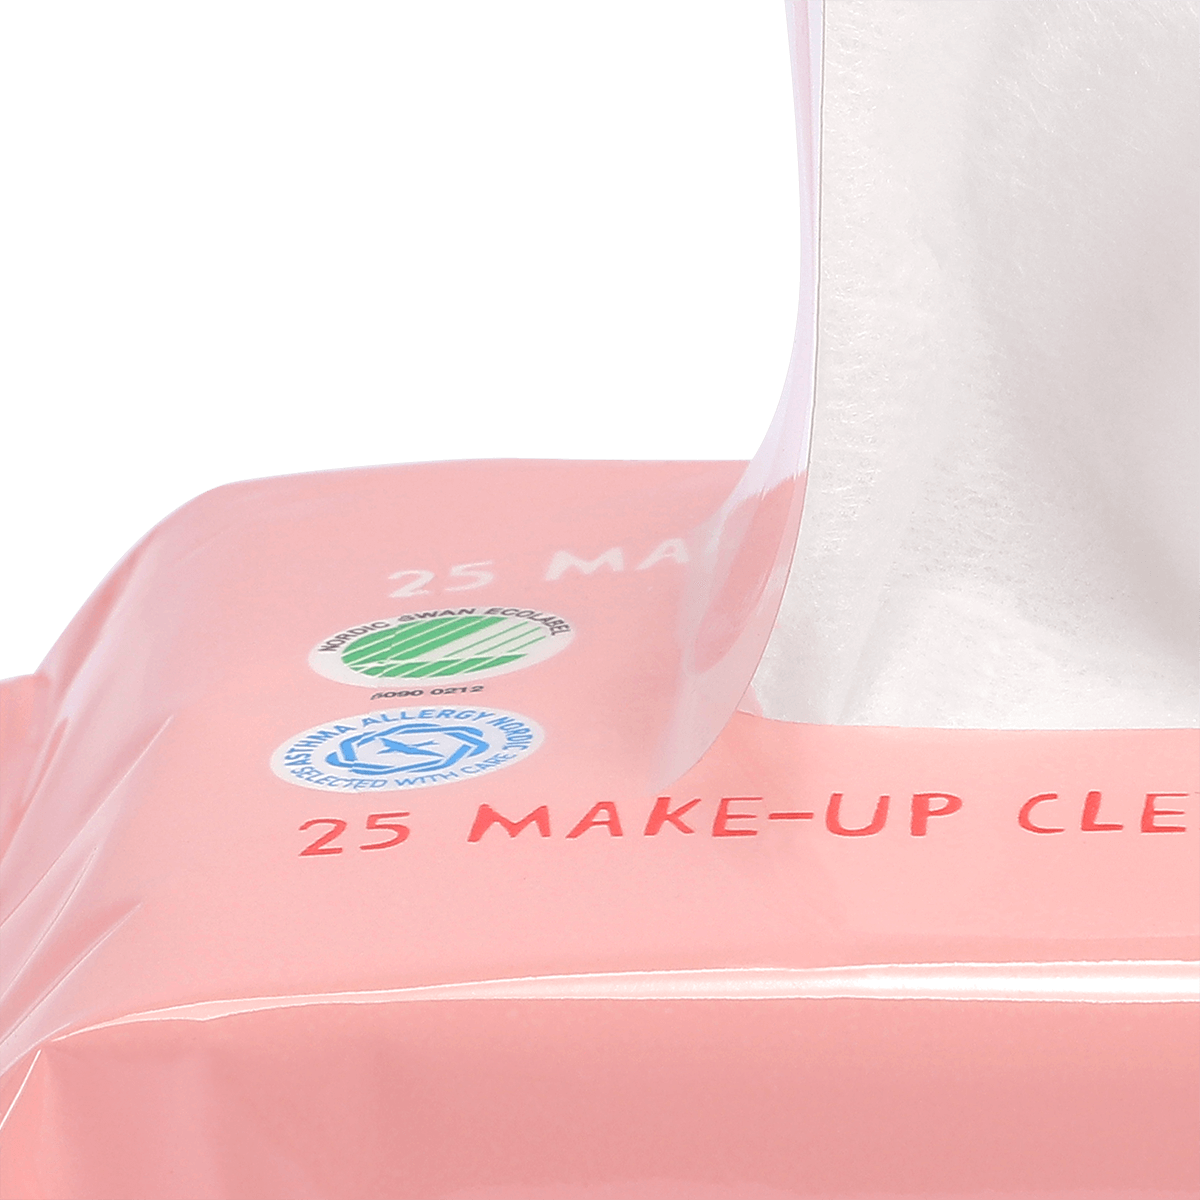 Make-up cleansing wipes Personal care Flying Tiger Copenhagen 